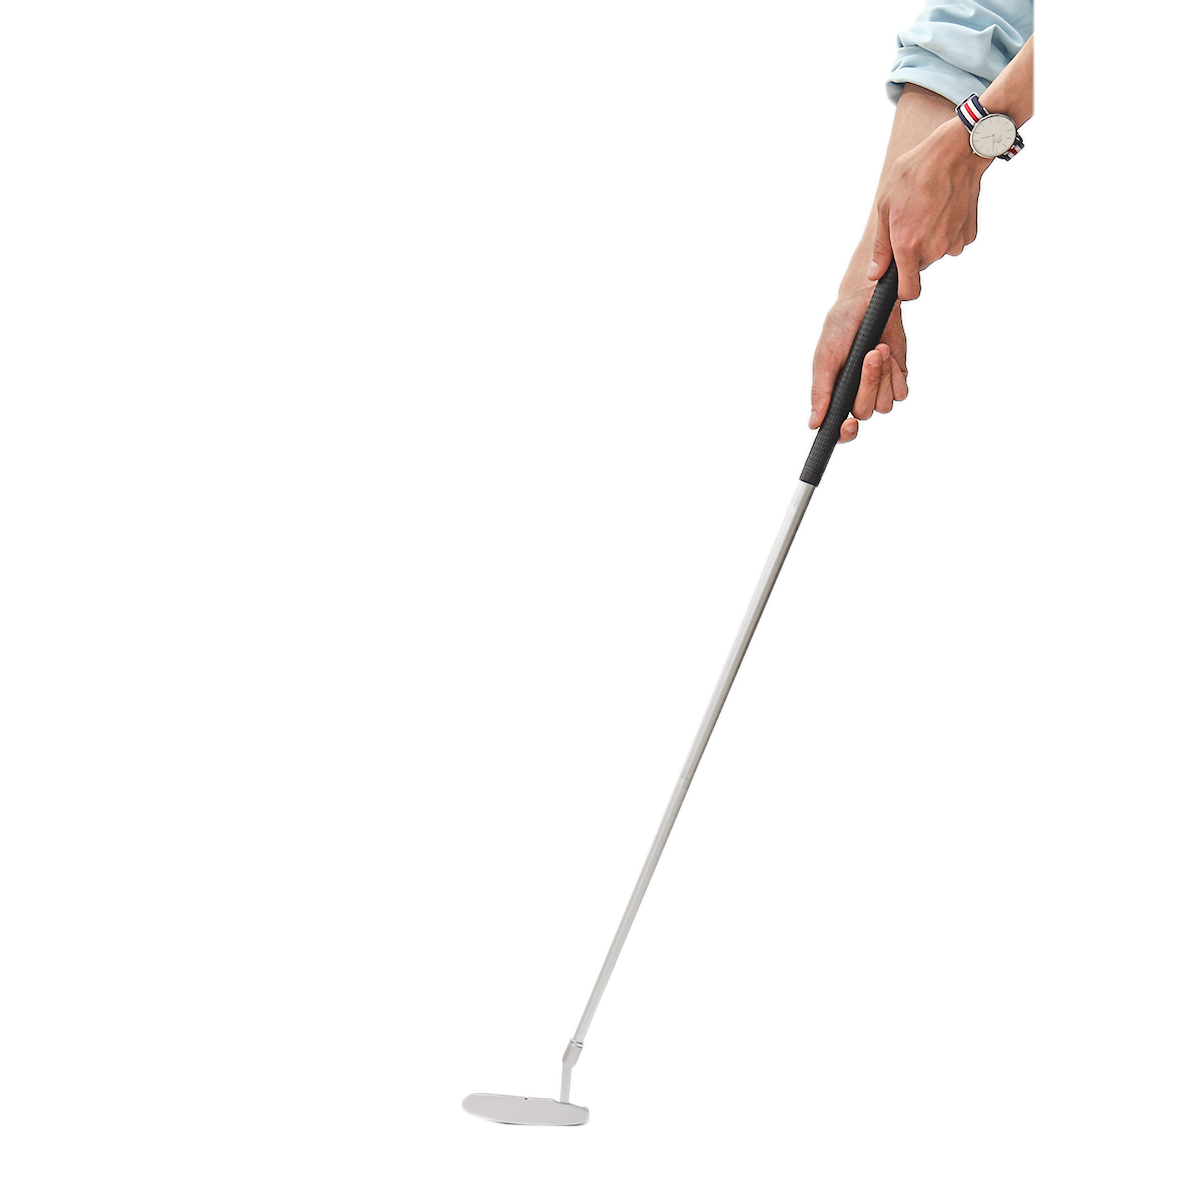 Removable-Golf-Alignment-Stick-Chipping-Swing-Trainer-Sport-Golf-Pole-with-Golf-Ball-1707297-3